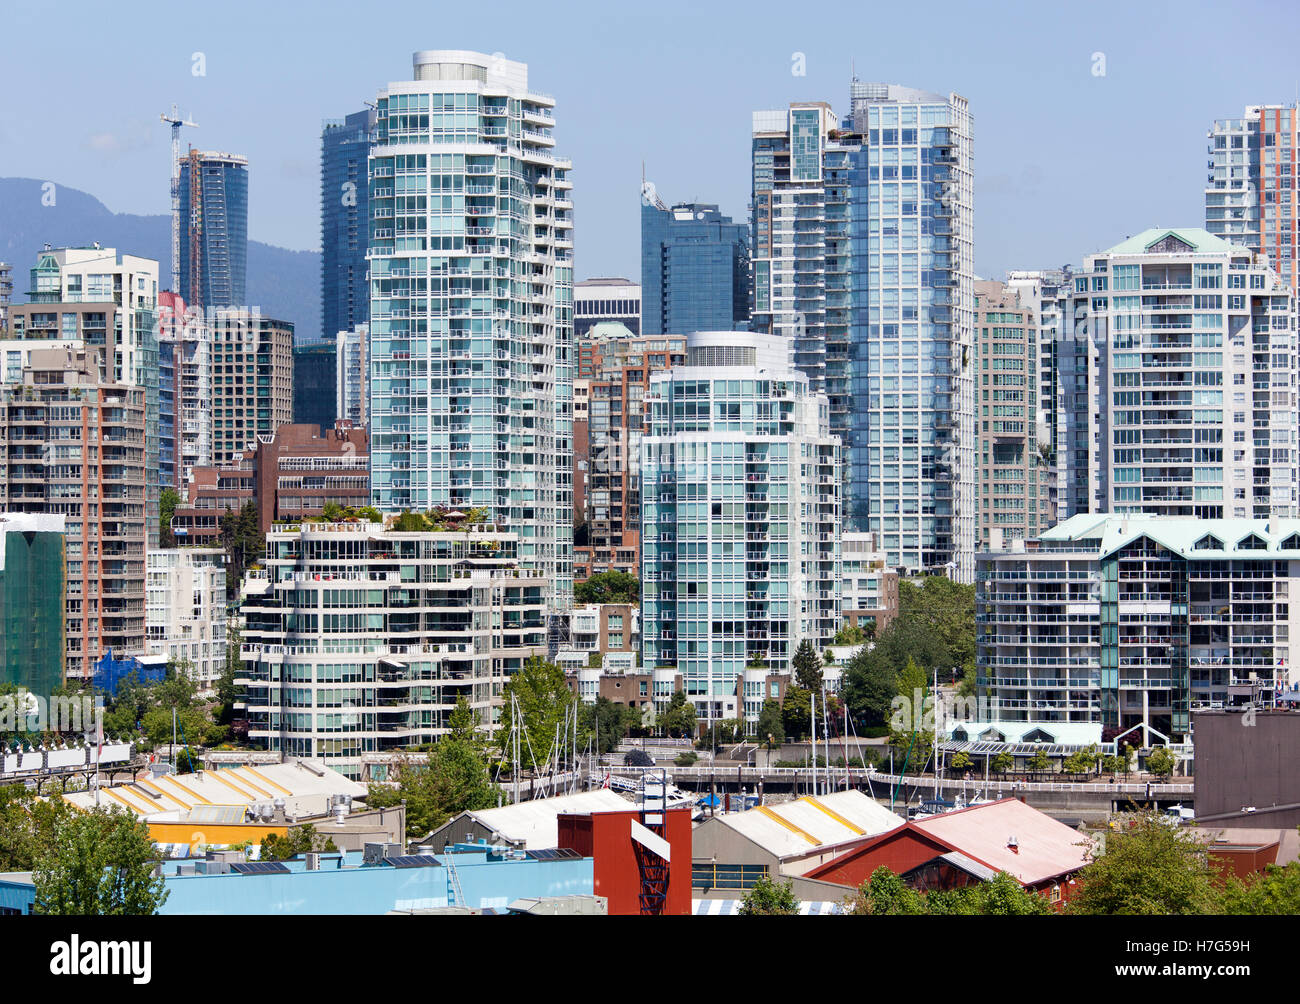 The skyline of tall apartment buildings in Davie Village residential district (Vancouver, British Columbia). Stock Photo